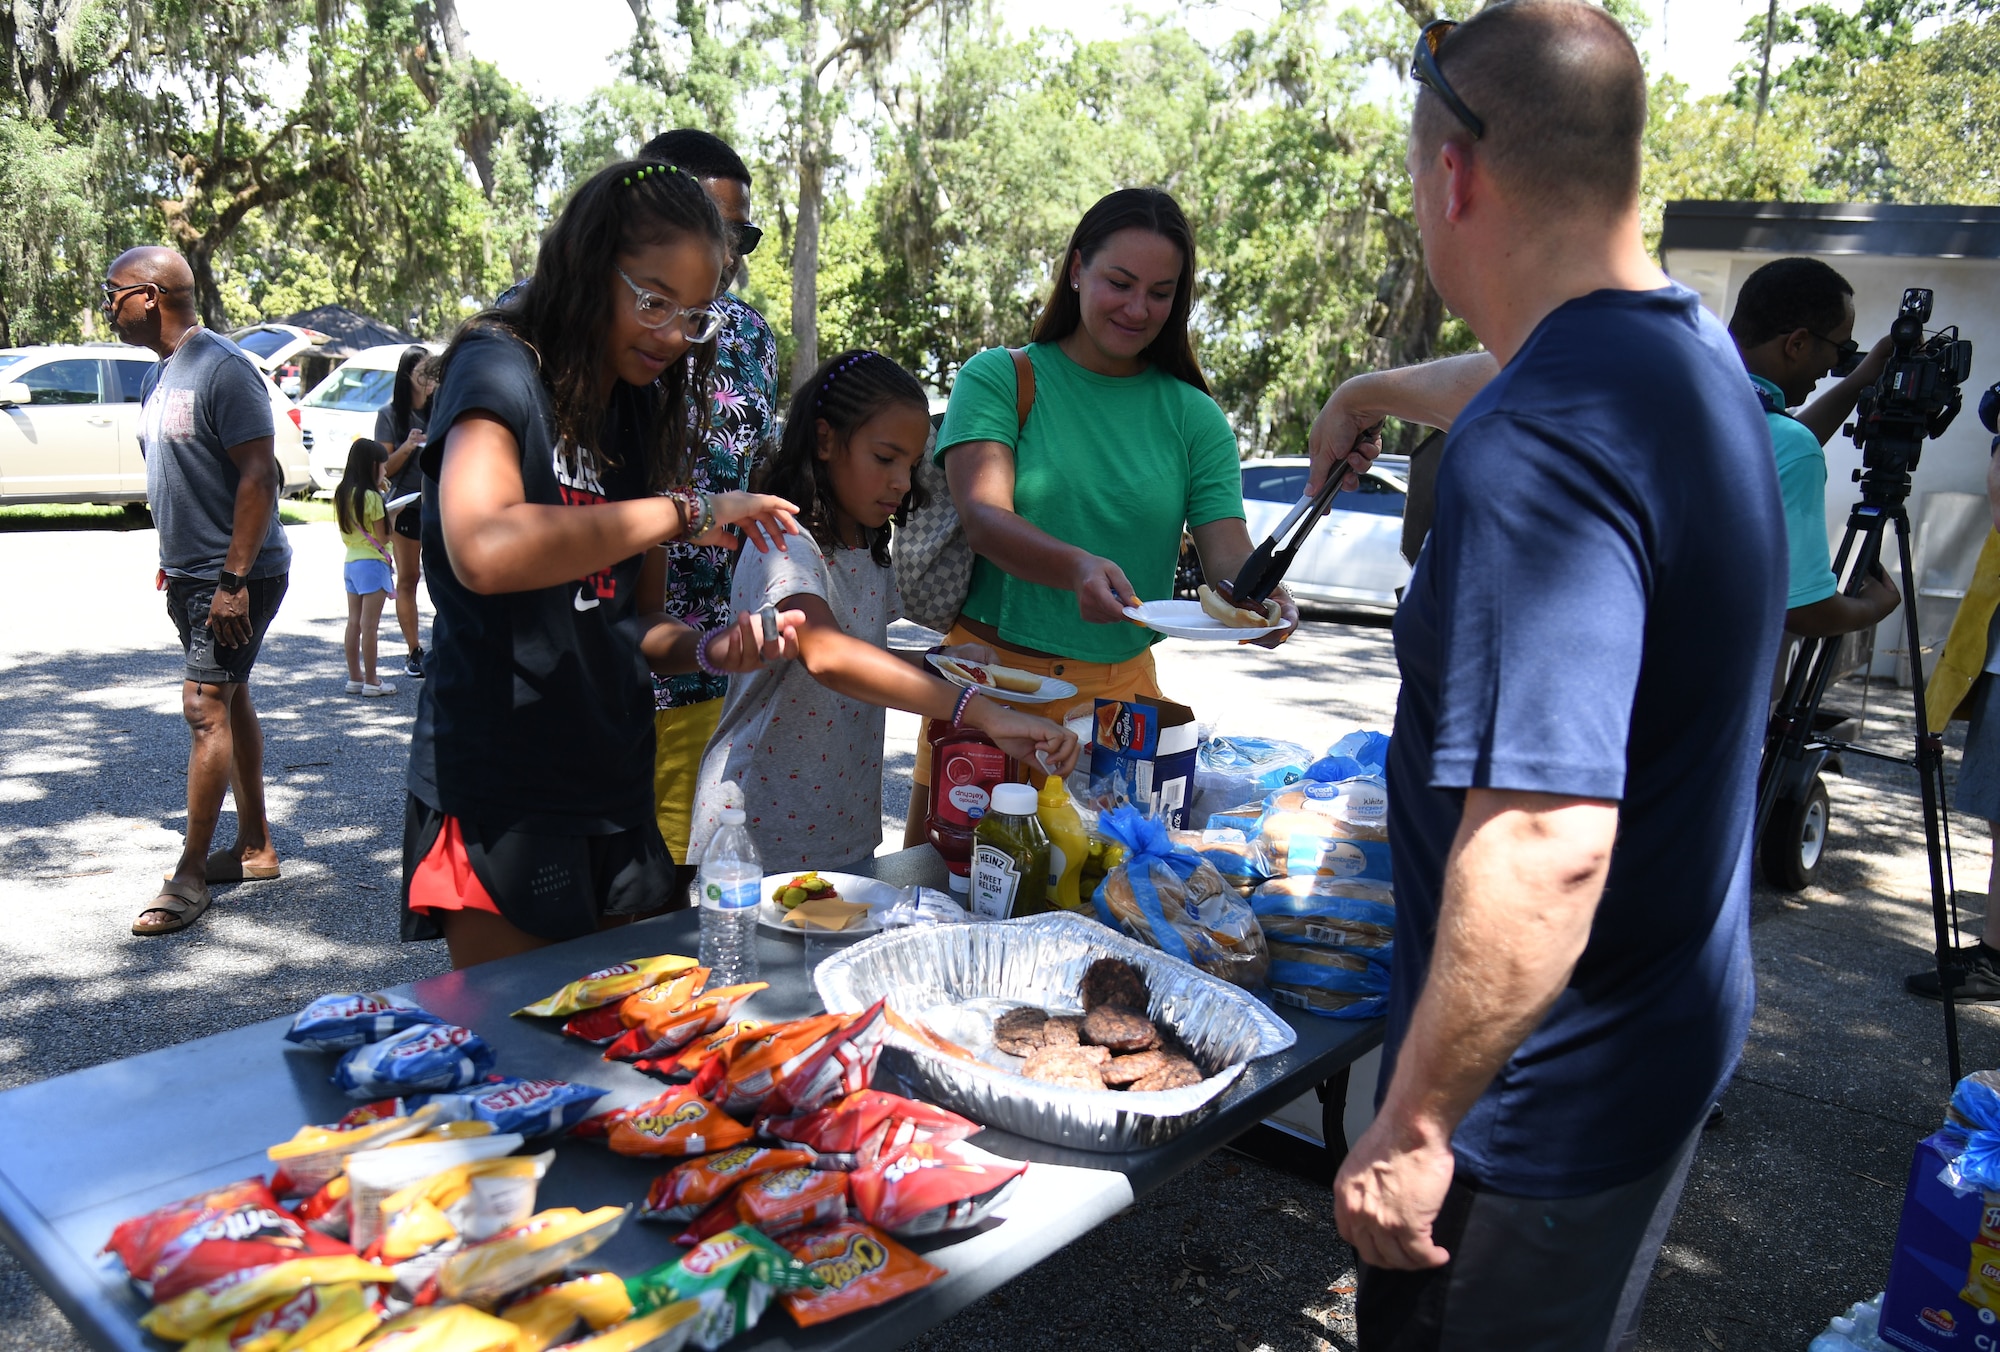 U.S. Air Force Chief Master Sgt. Don Burkhart, Second Air Force training pipeline manager, distributes food to Keesler families during a Back to School Bash at the Keesler Marina on Keesler Air Force Base, Mississippi, July 28, 2022. The bash, a collaboration of agencies that included Operation Homefront, the Back-to-School Brigade and Keesler support agencies, provided families with nearly 200 bookbags filled with supplies and included games and free snow cones. (U.S. Air Force photo by Kemberly Groue)